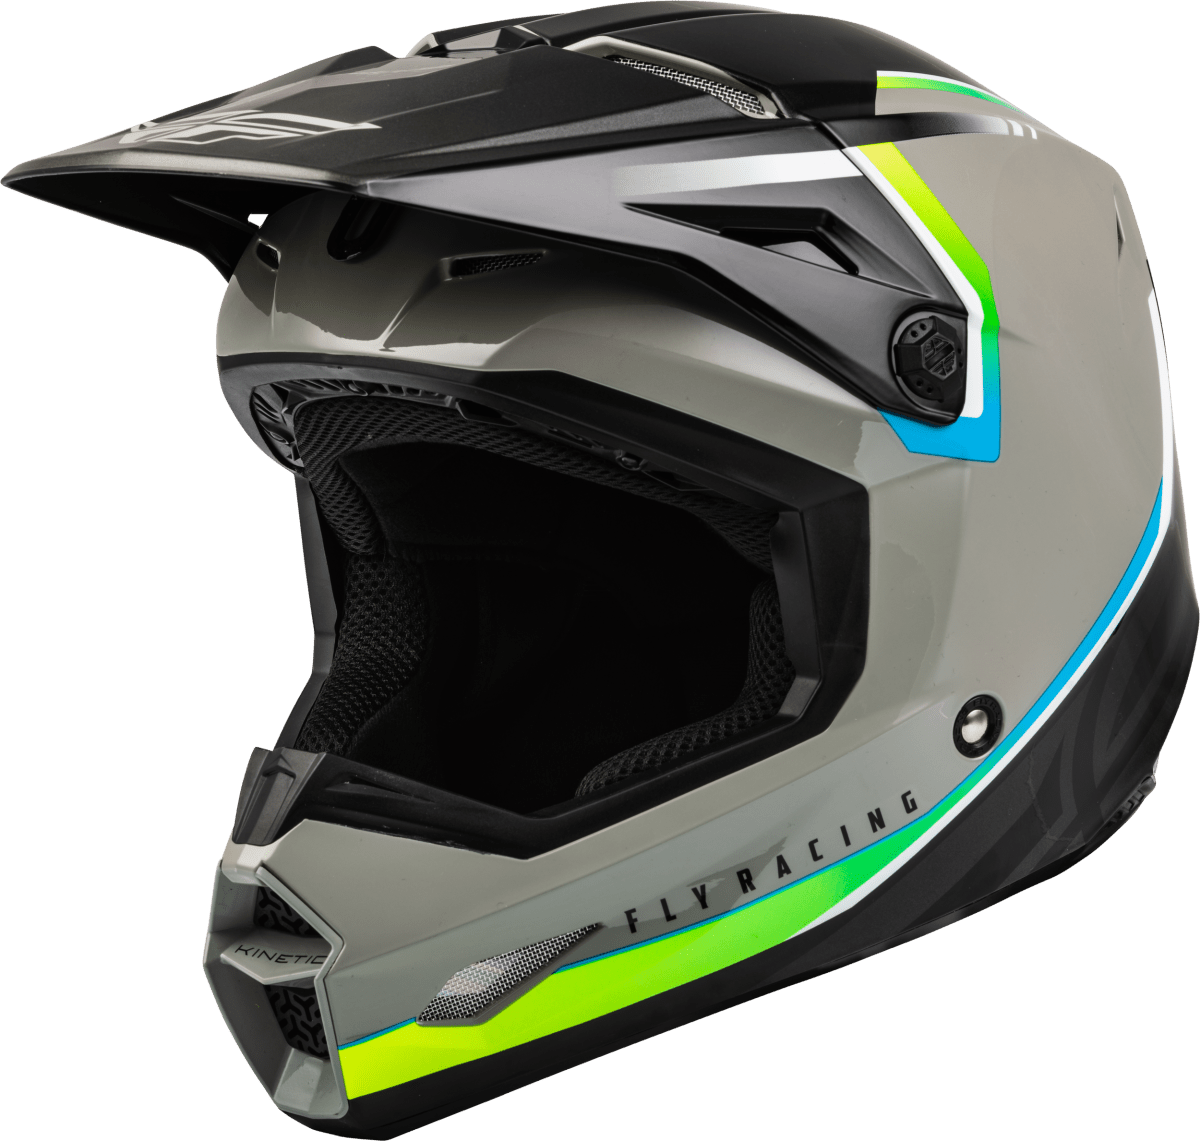 FLY RACING - YOUTH KINETIC VISION HELMET - 73-8650YL - 191361351891